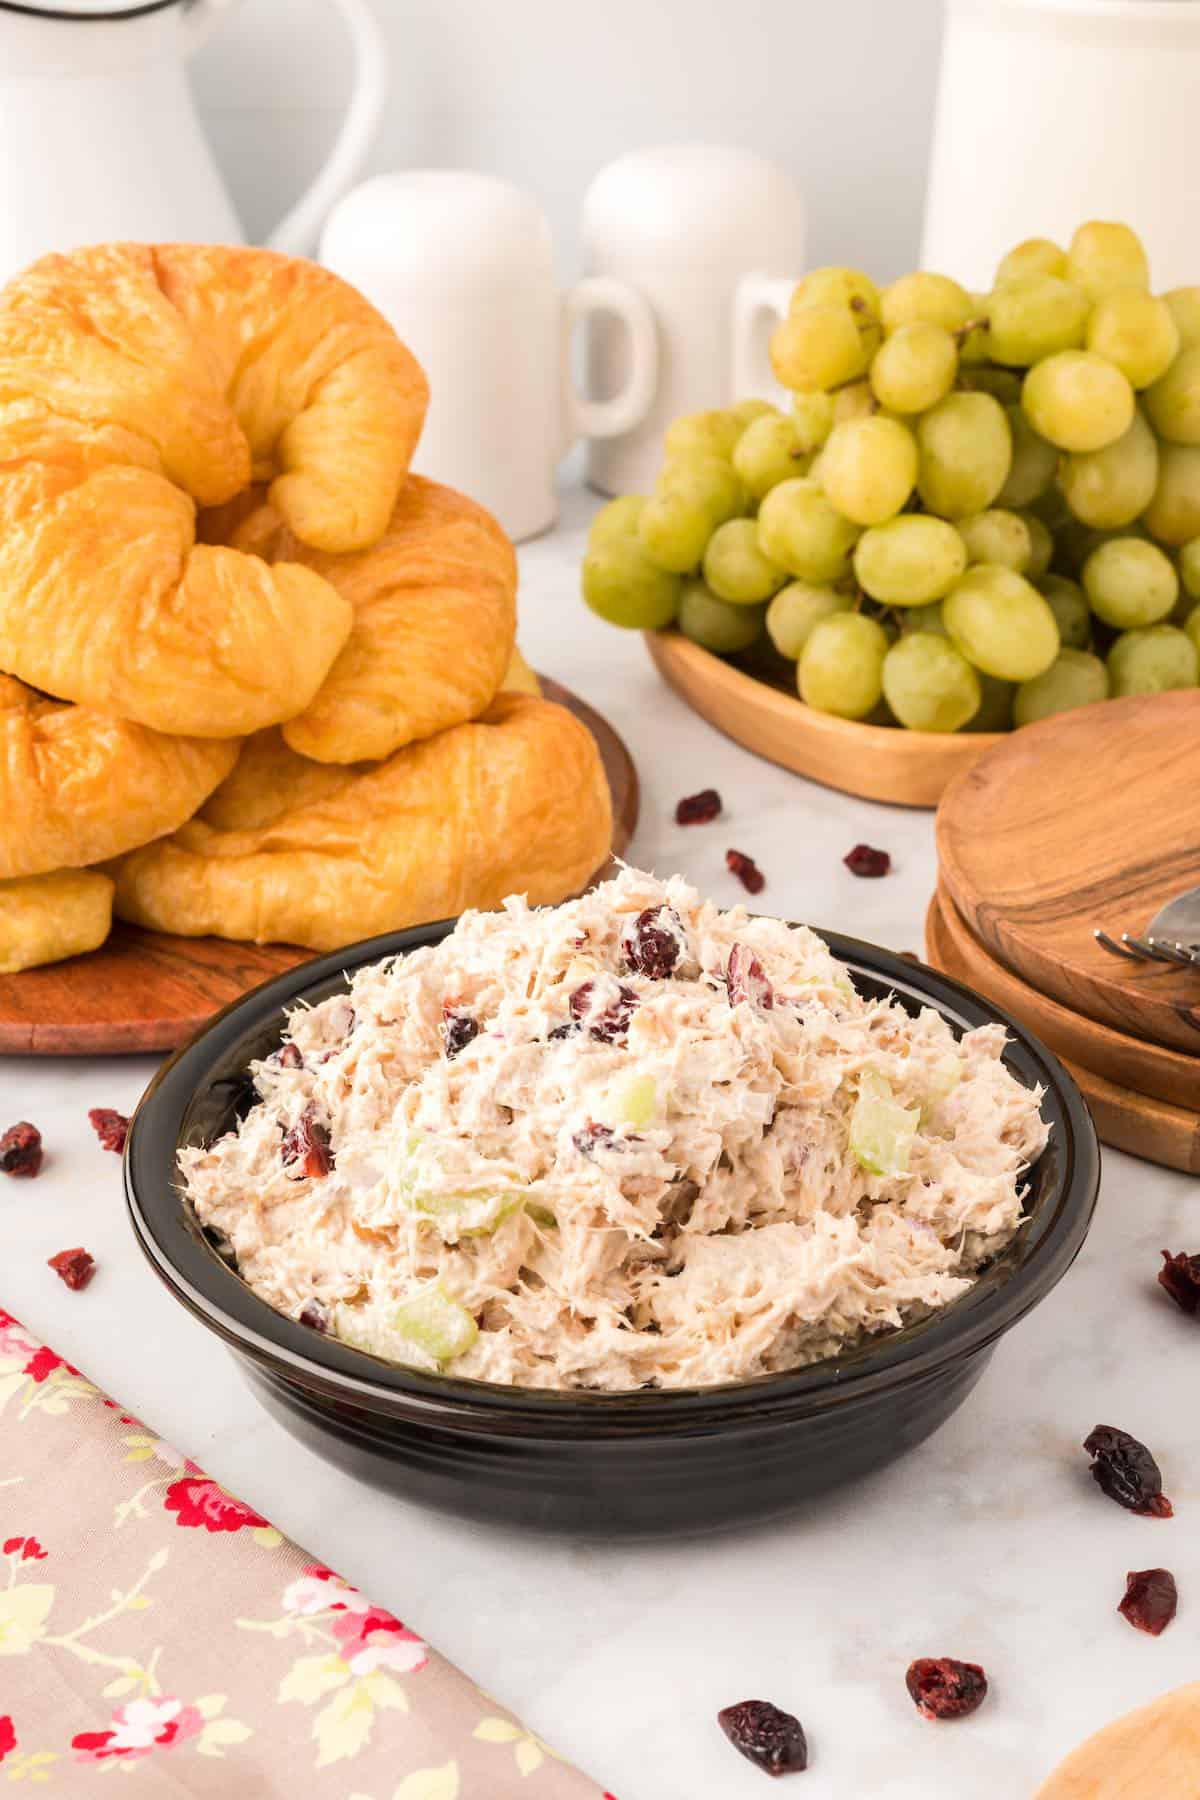 A bowl of cranberry walnut chicken salad with croissants and grapes in the background.